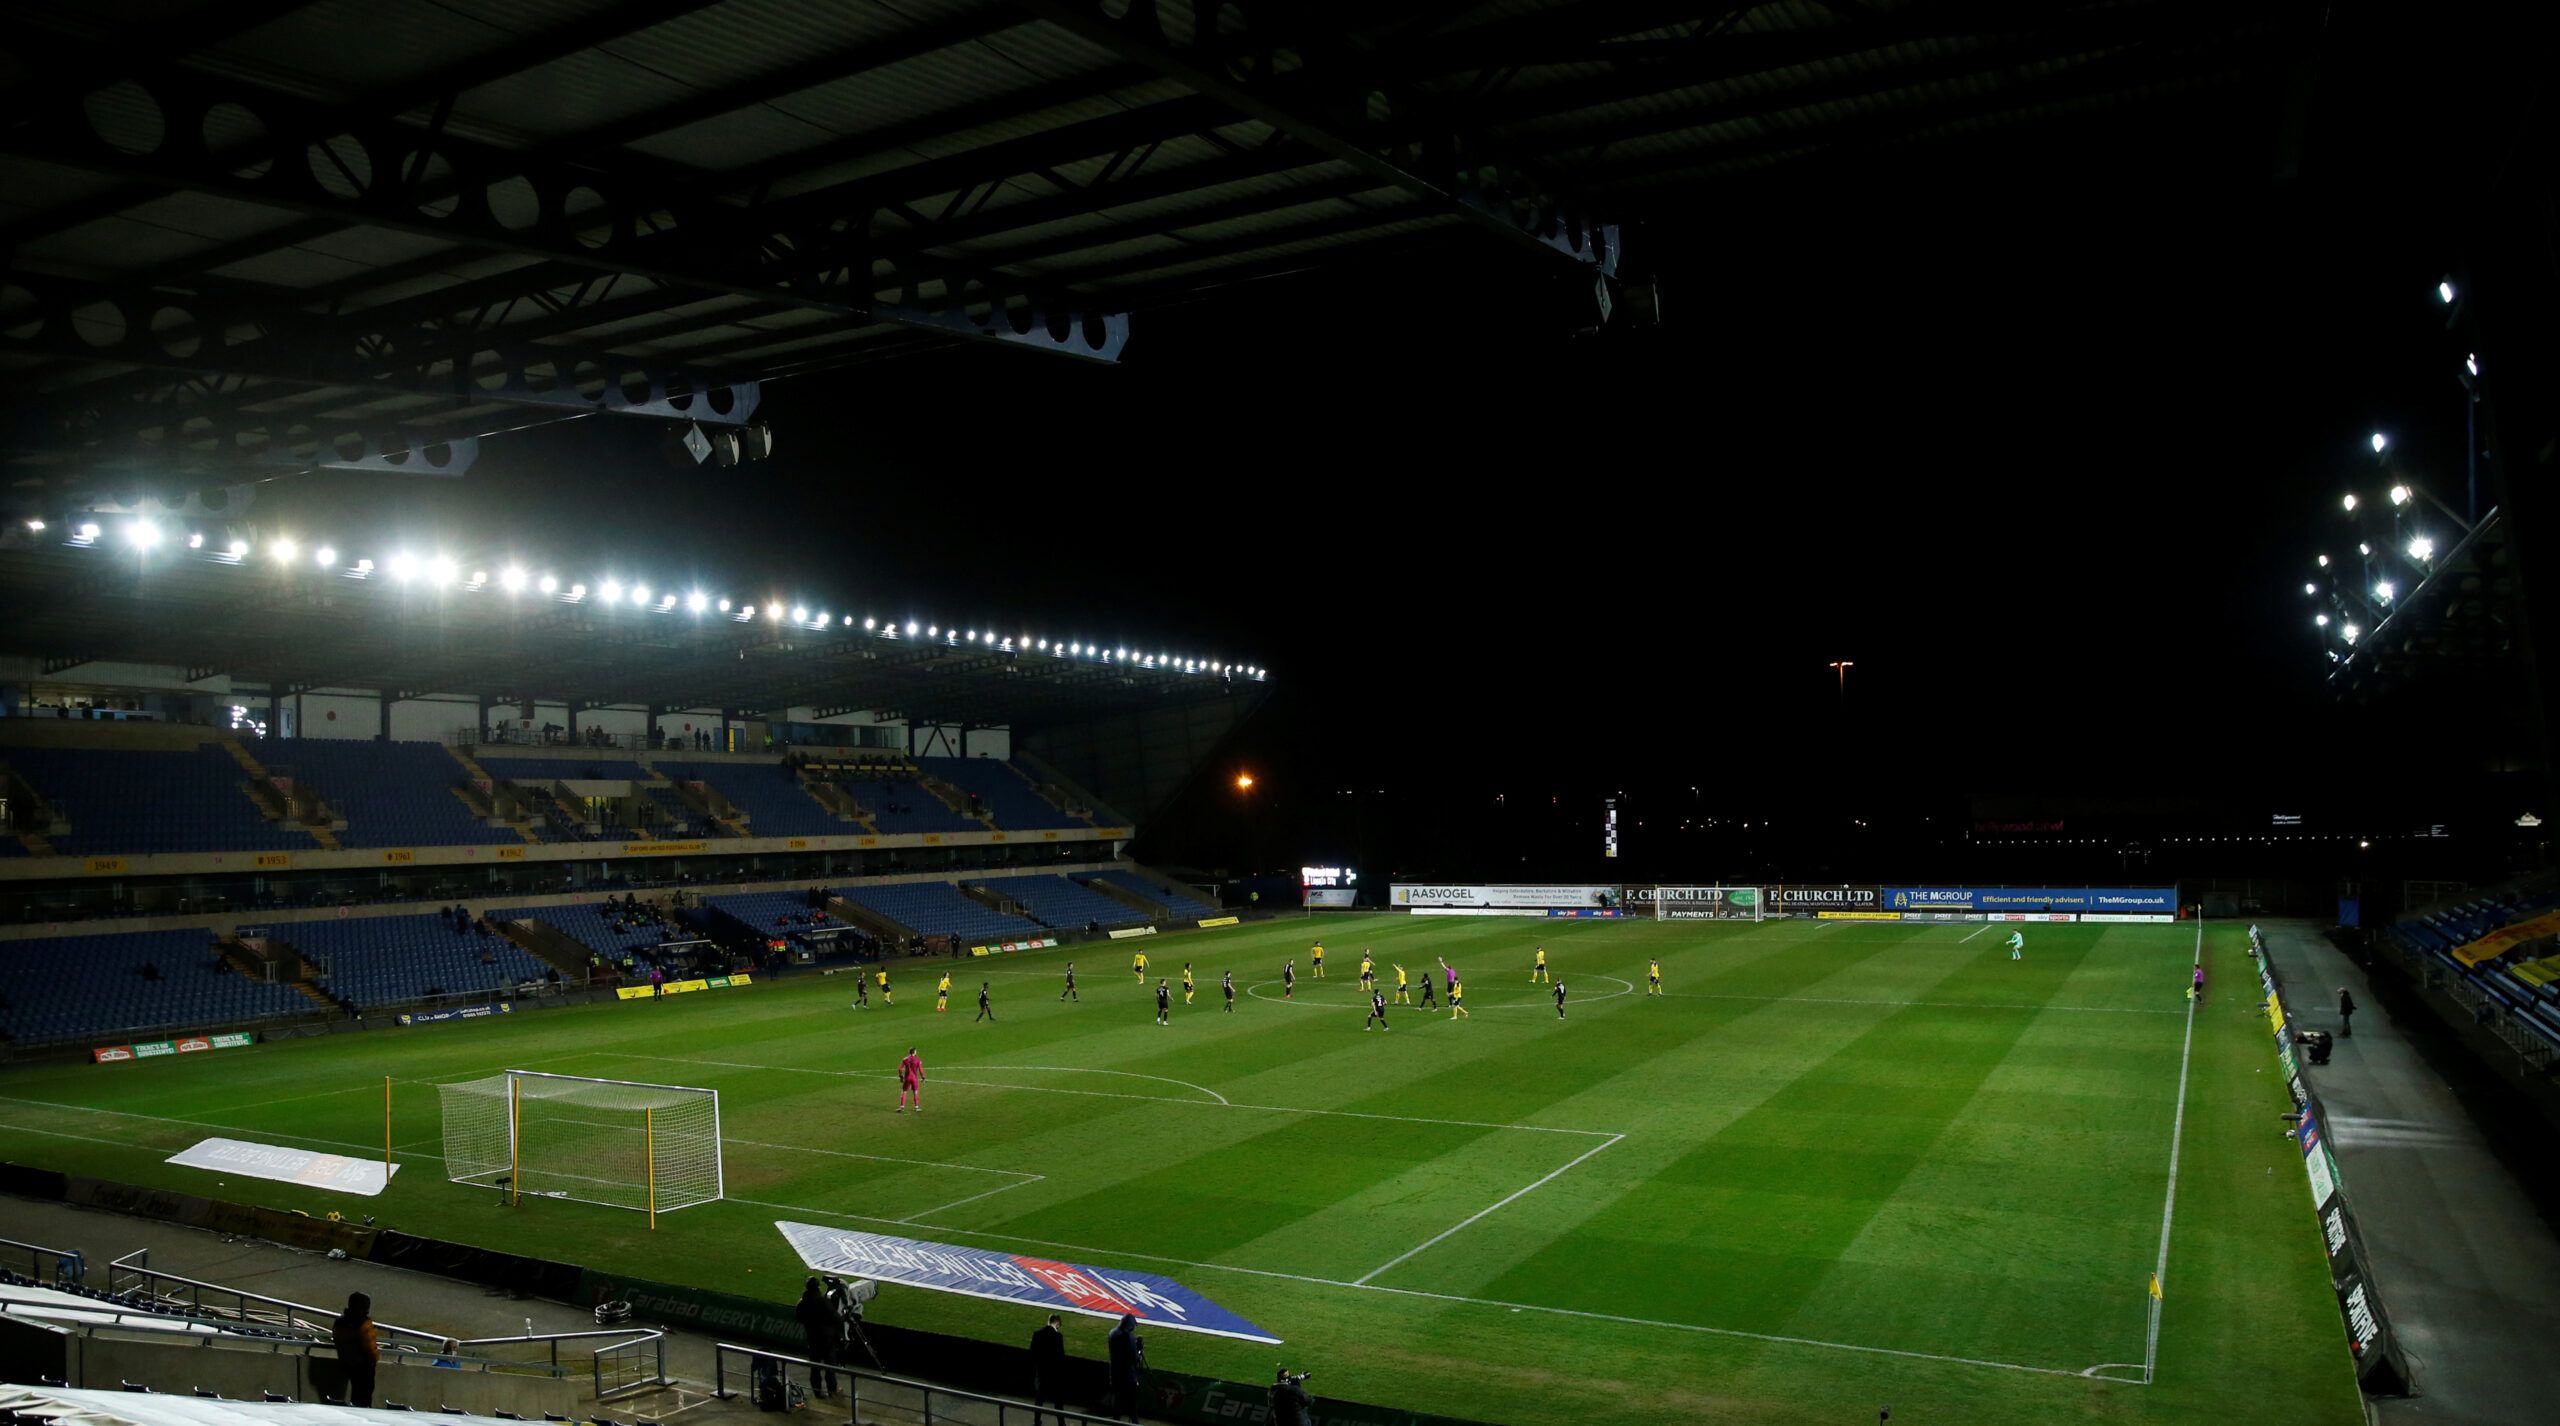 Soccer Football - League One - Oxford United v Lincoln City - Kassam Stadium, Oxford, Britain - March 26, 2021 General view during the match   Action Images/Andrew Boyers  EDITORIAL USE ONLY. No use with unauthorized audio, video, data, fixture lists, club/league logos or 